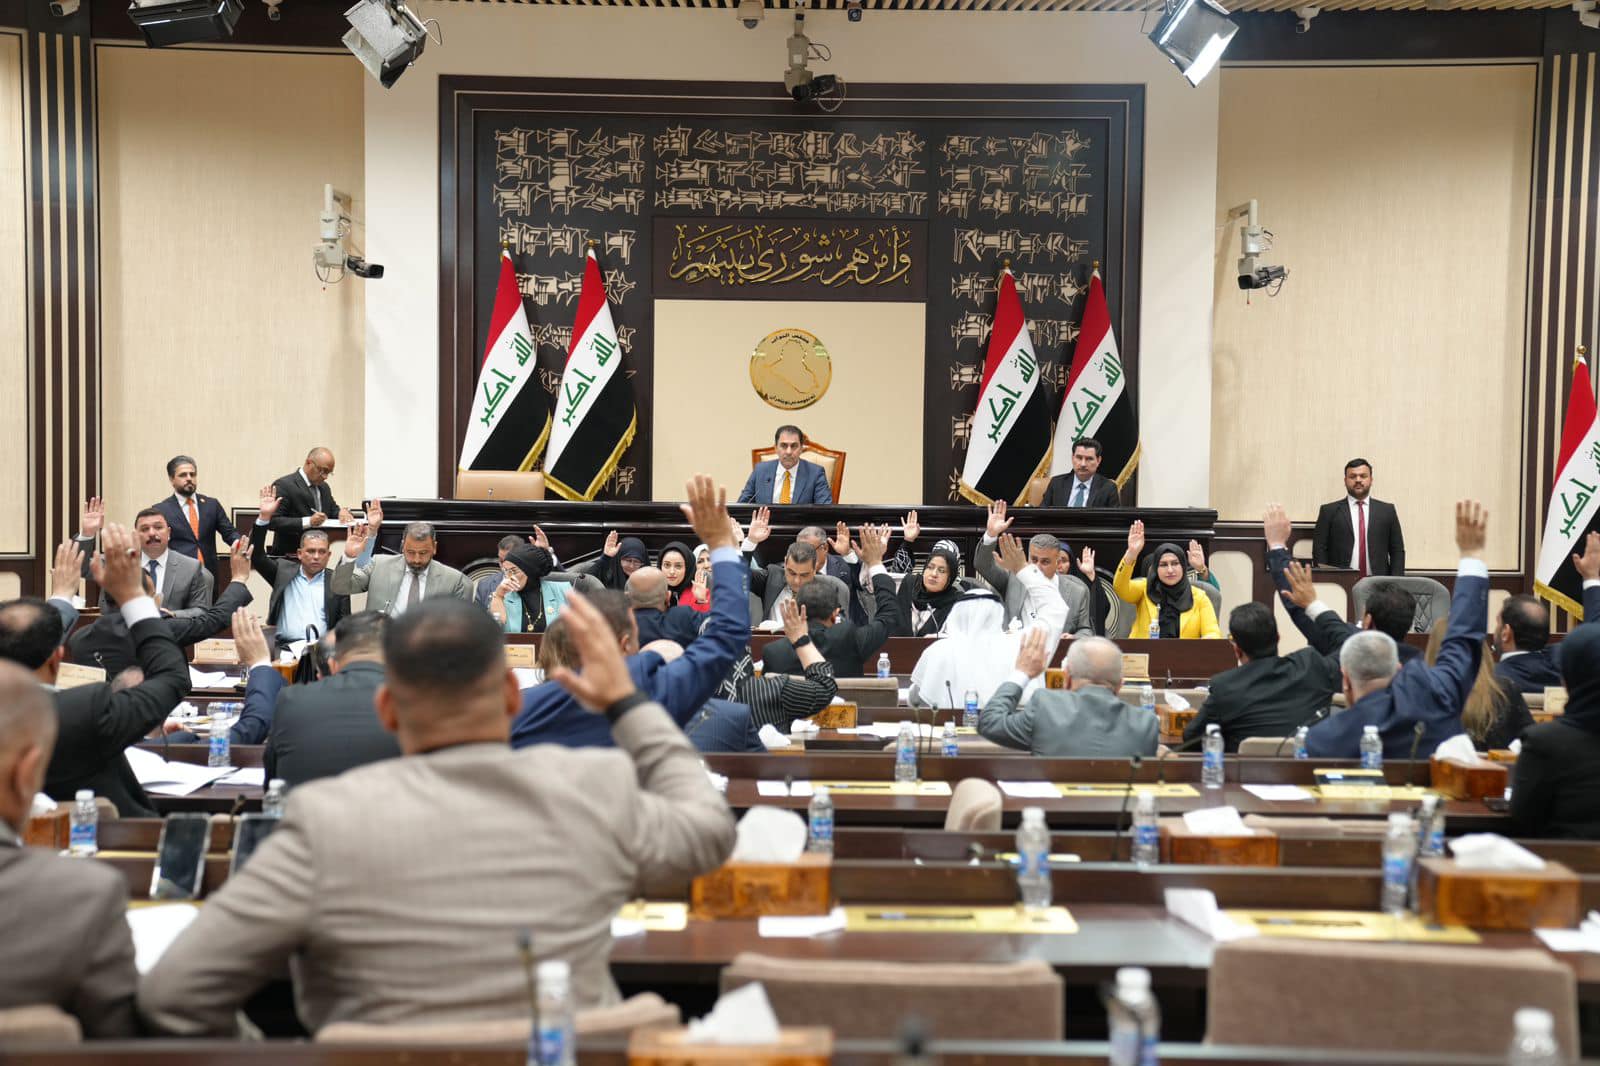 Experts Iraq unlikely to hold early elections due to legal logistical hurdles